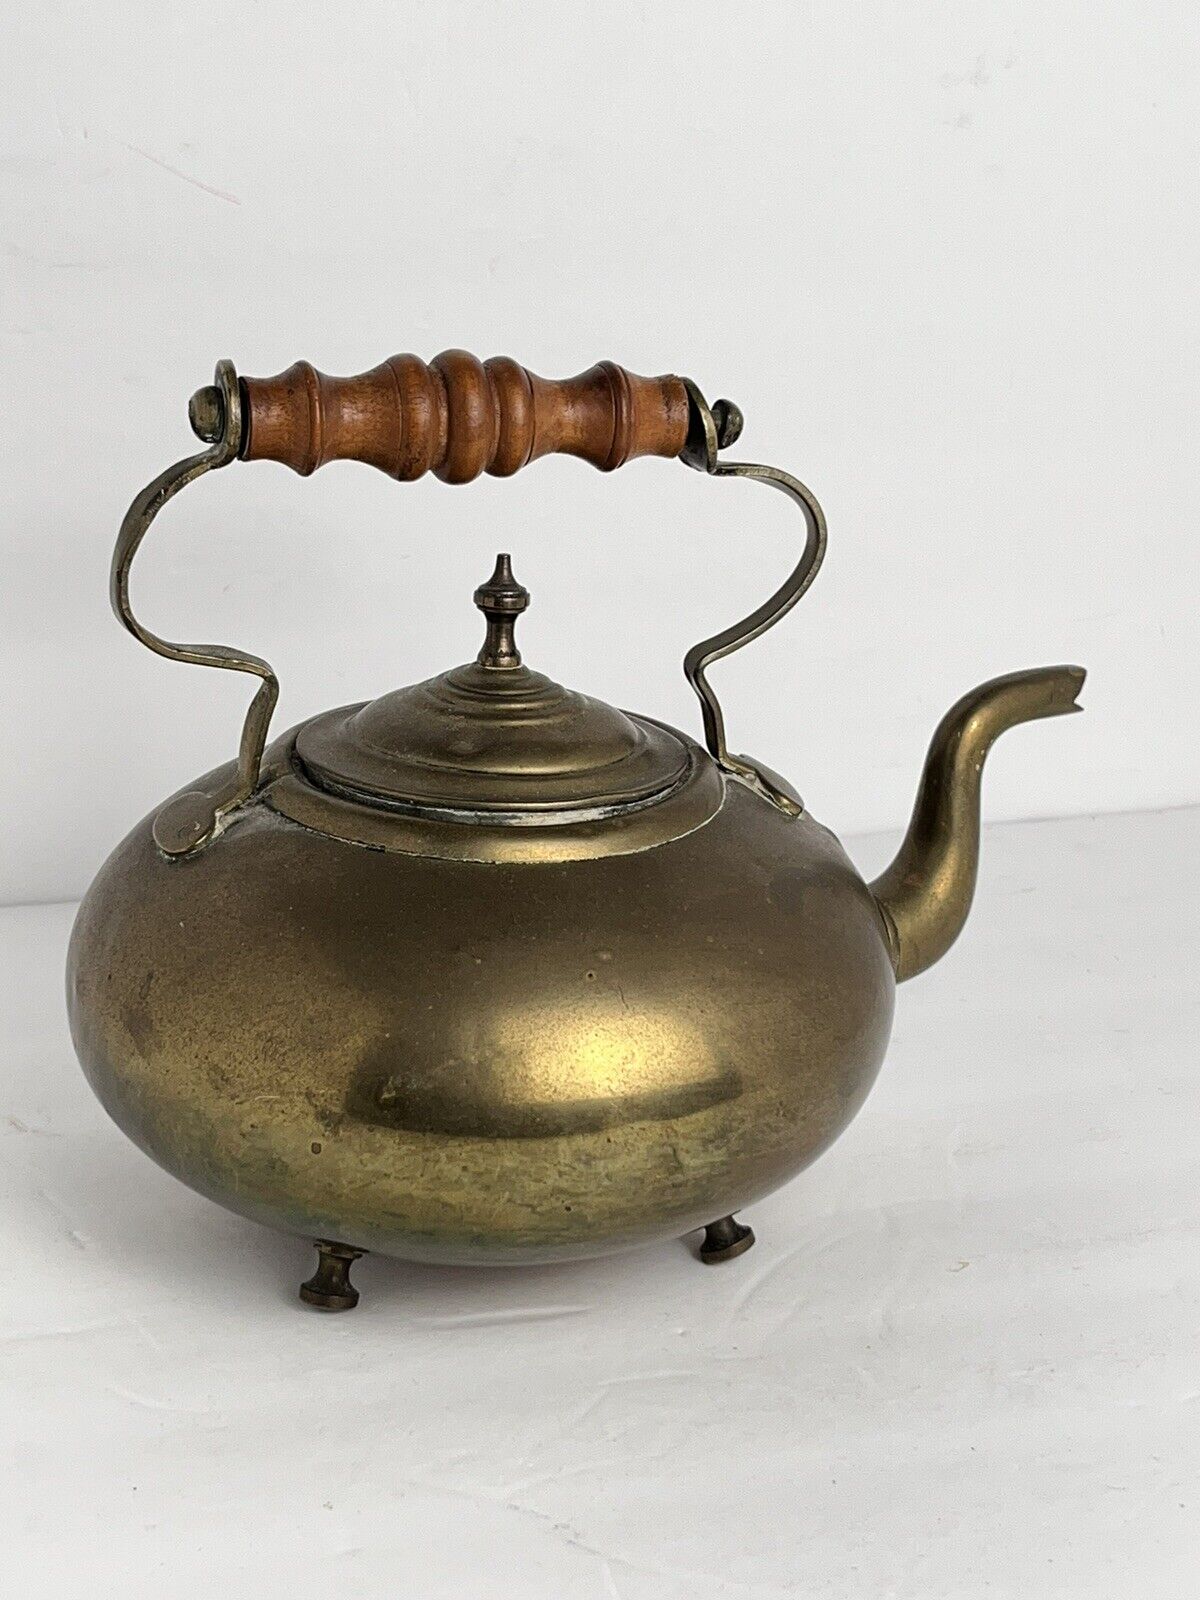 VICTORIAN BRASS TEAPOT MARKED WITH A SUN.